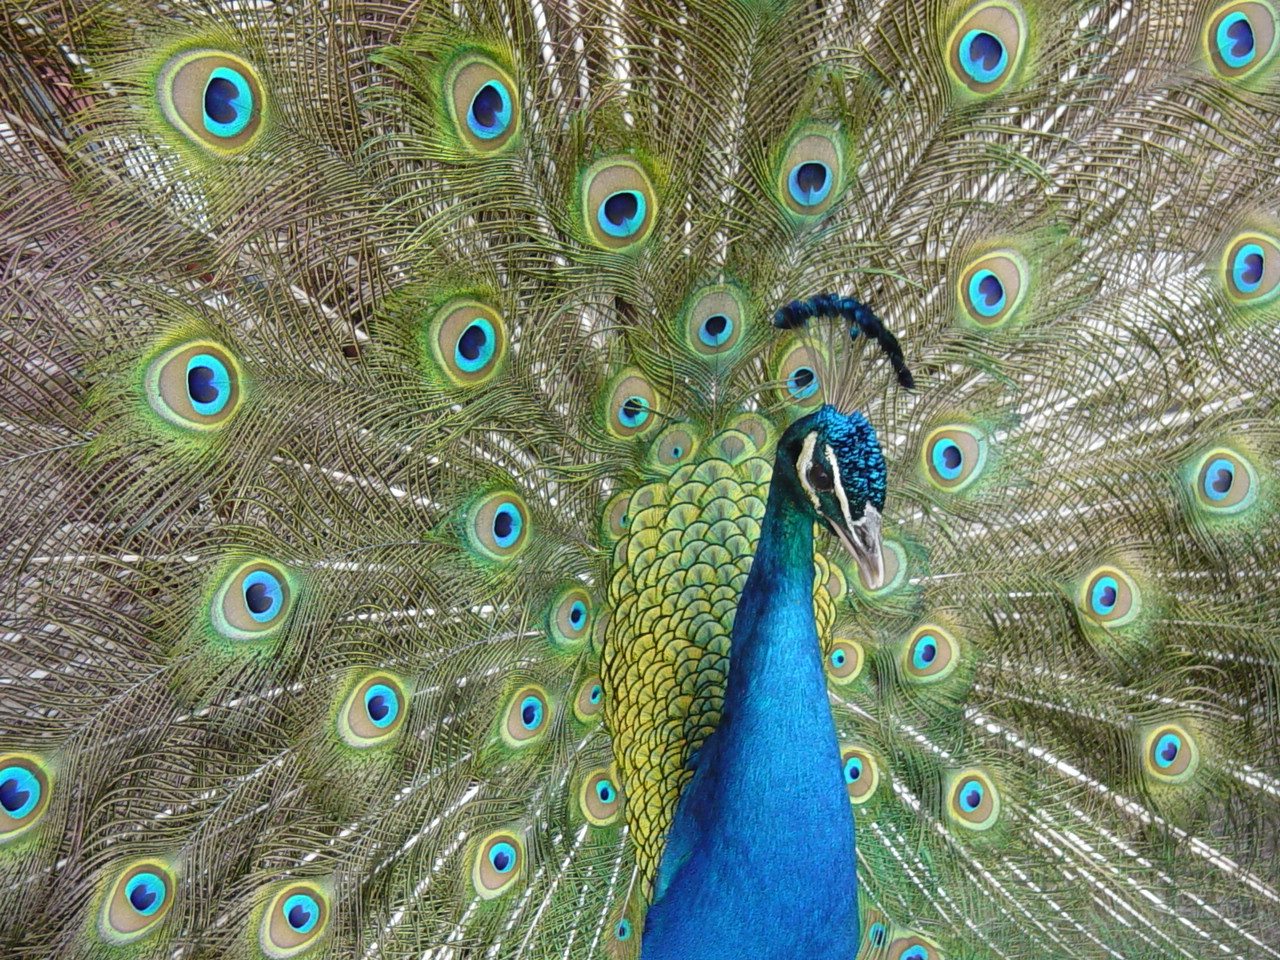 Peacock's plumage at Oak Mountain State Park